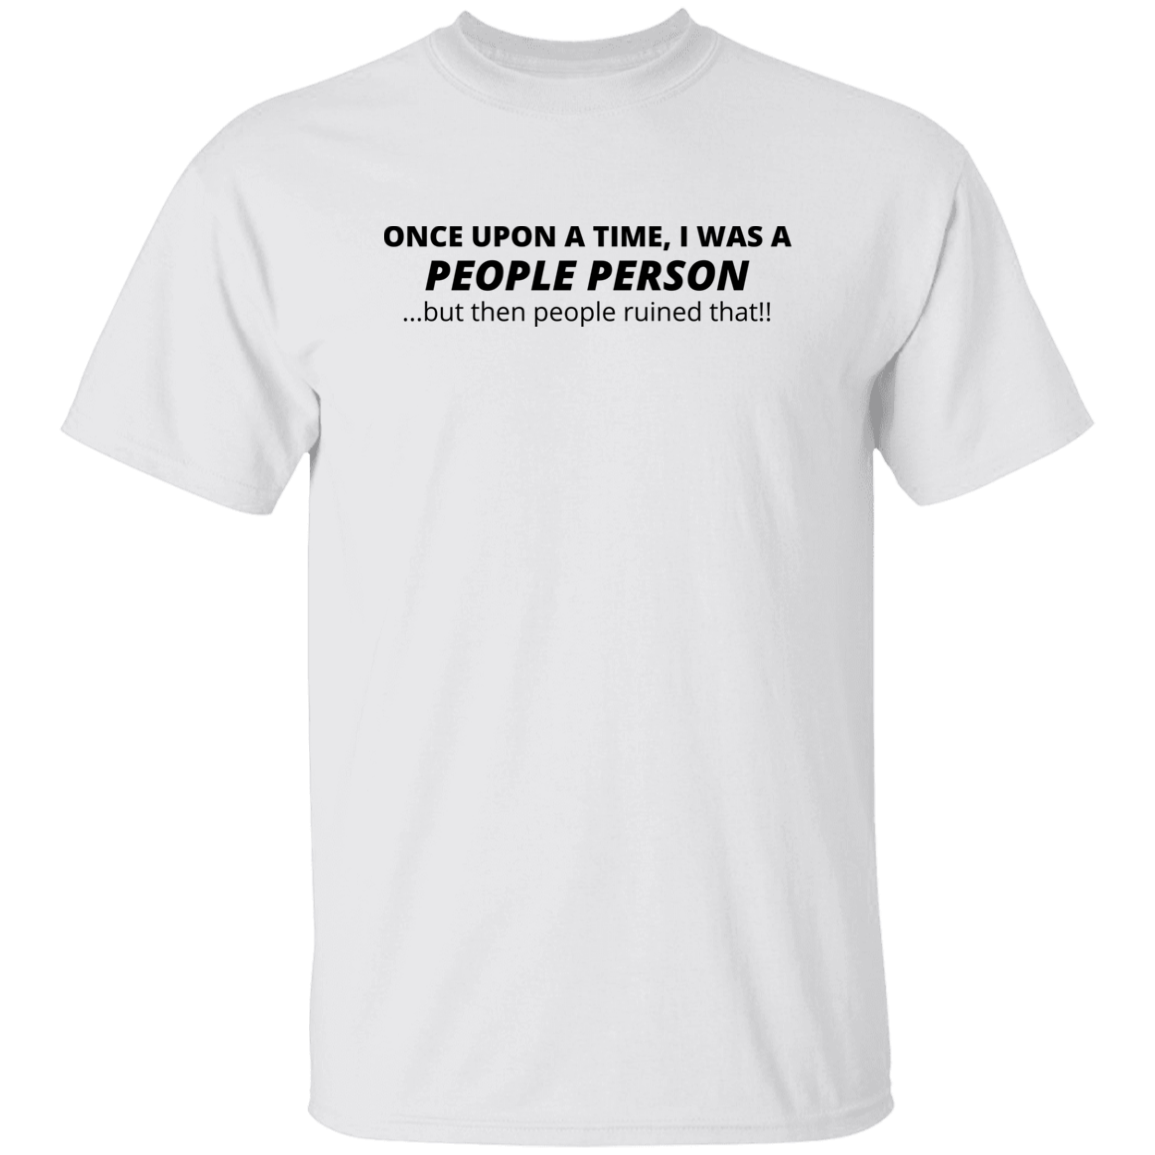 People Person - T-Shirt